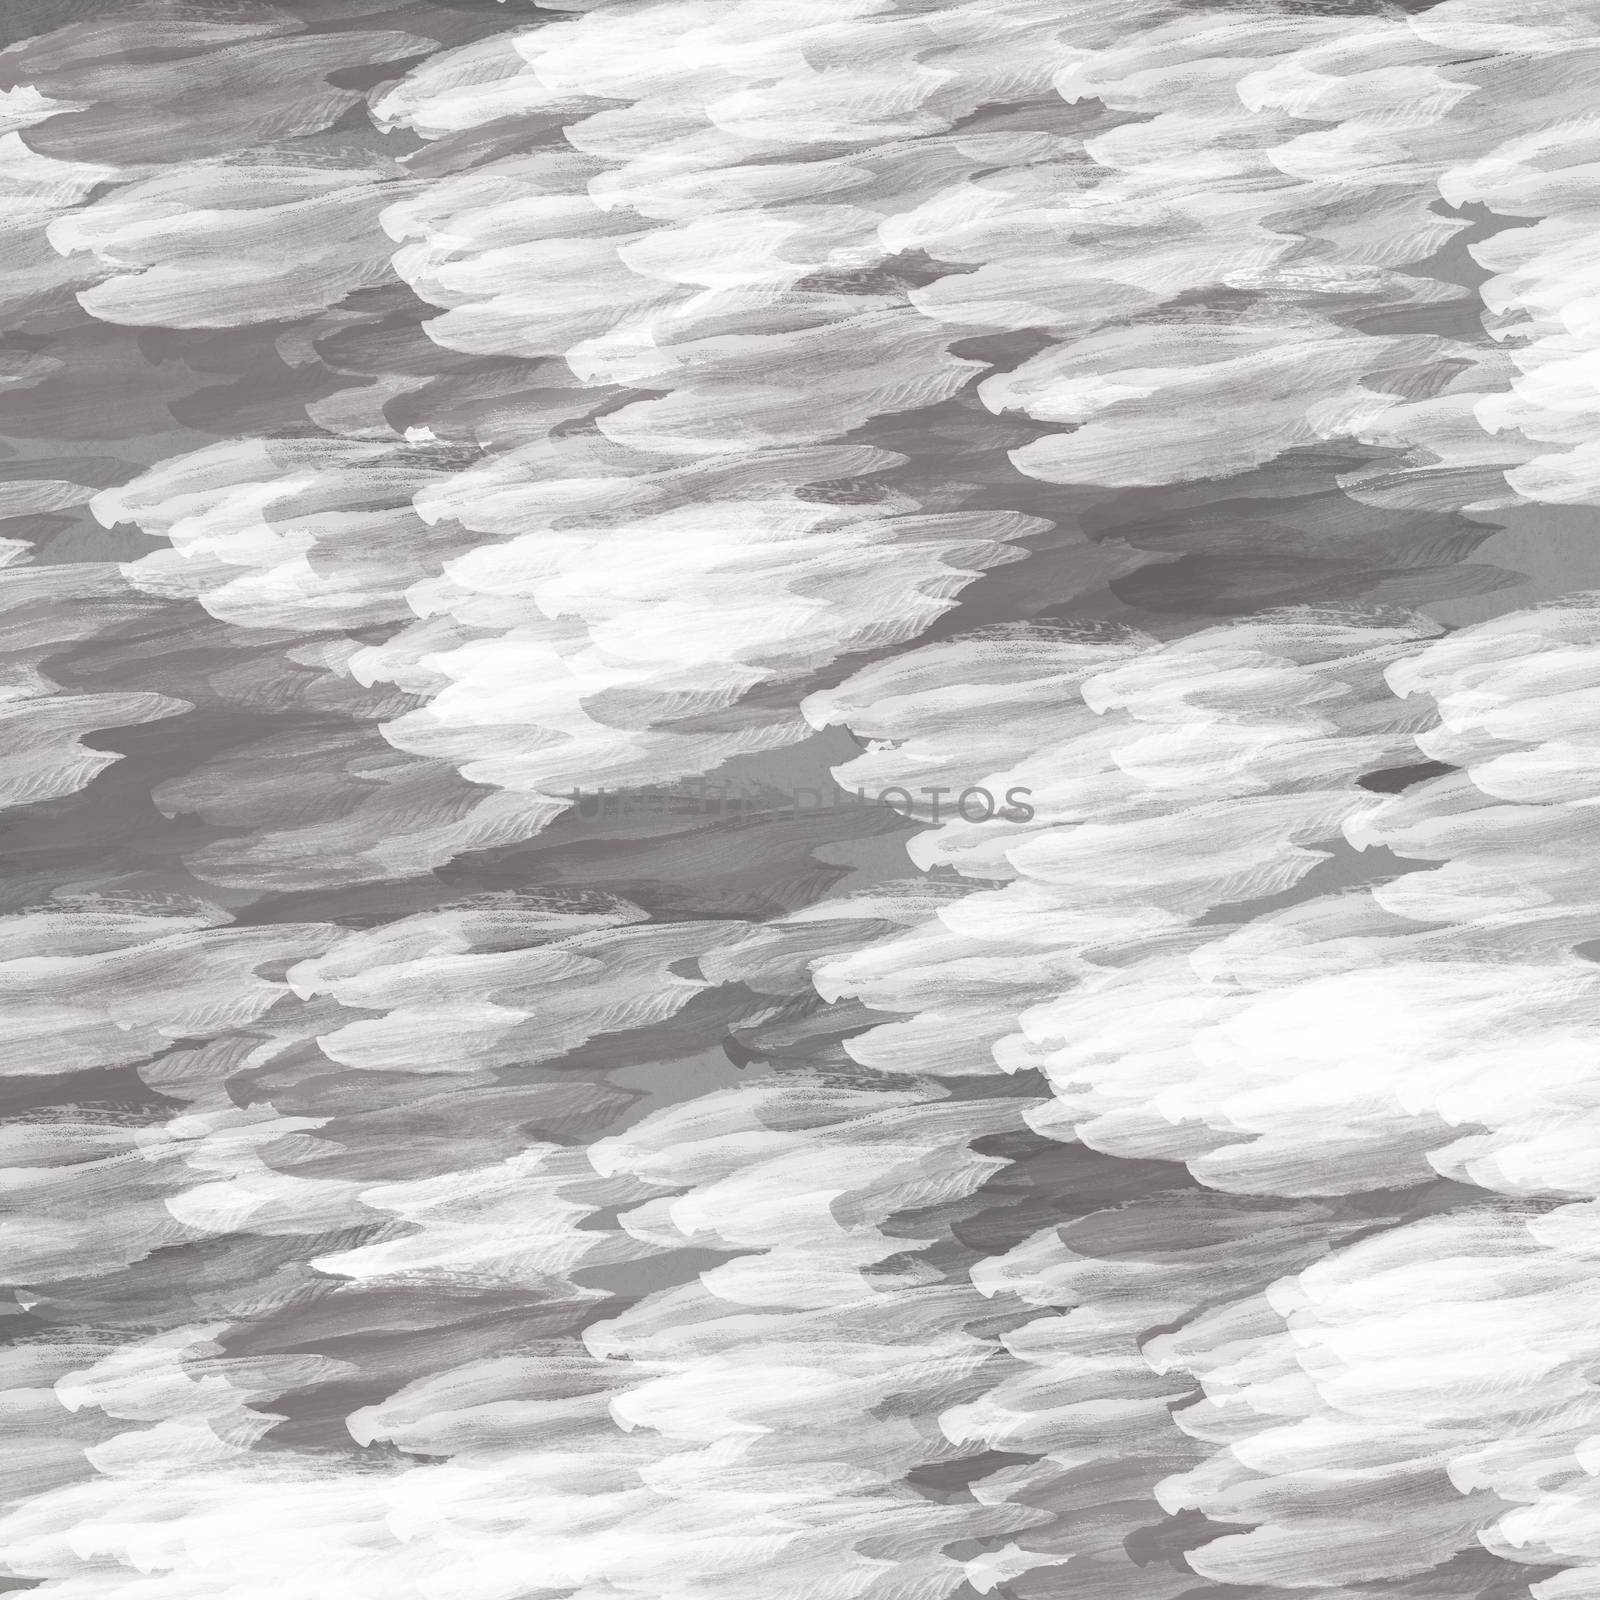 Grey and white brush strokes abstract cloud pattern.